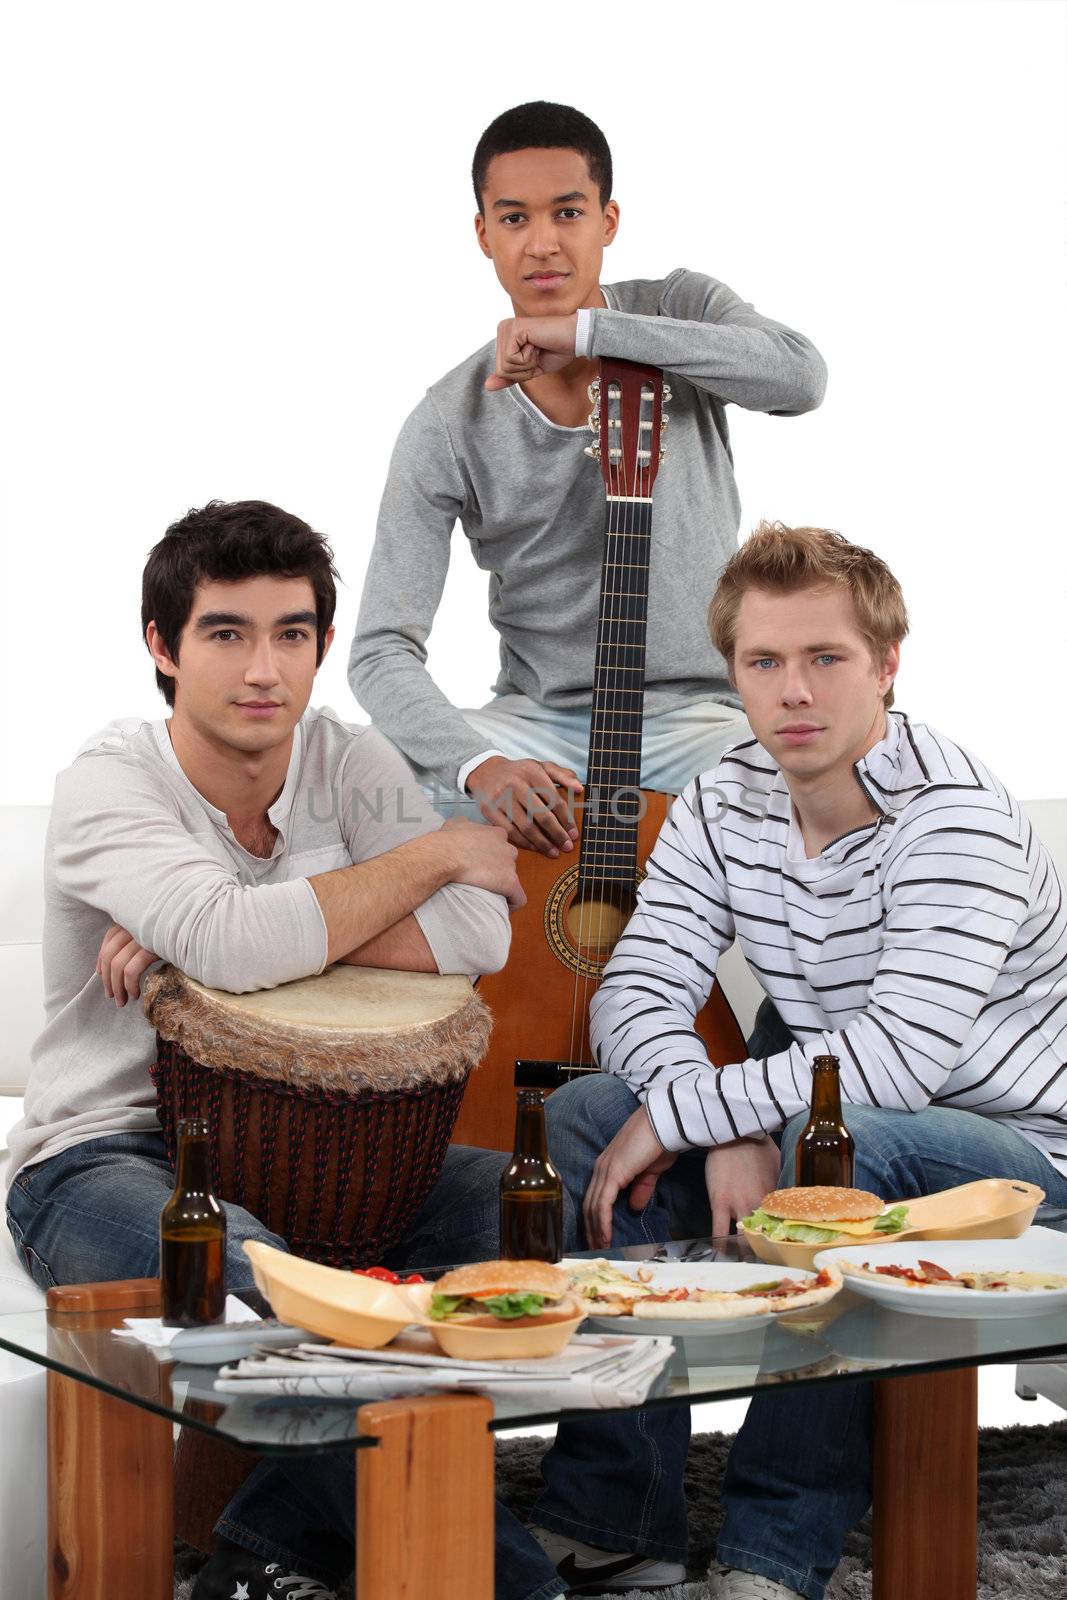 Young men with musical instruments